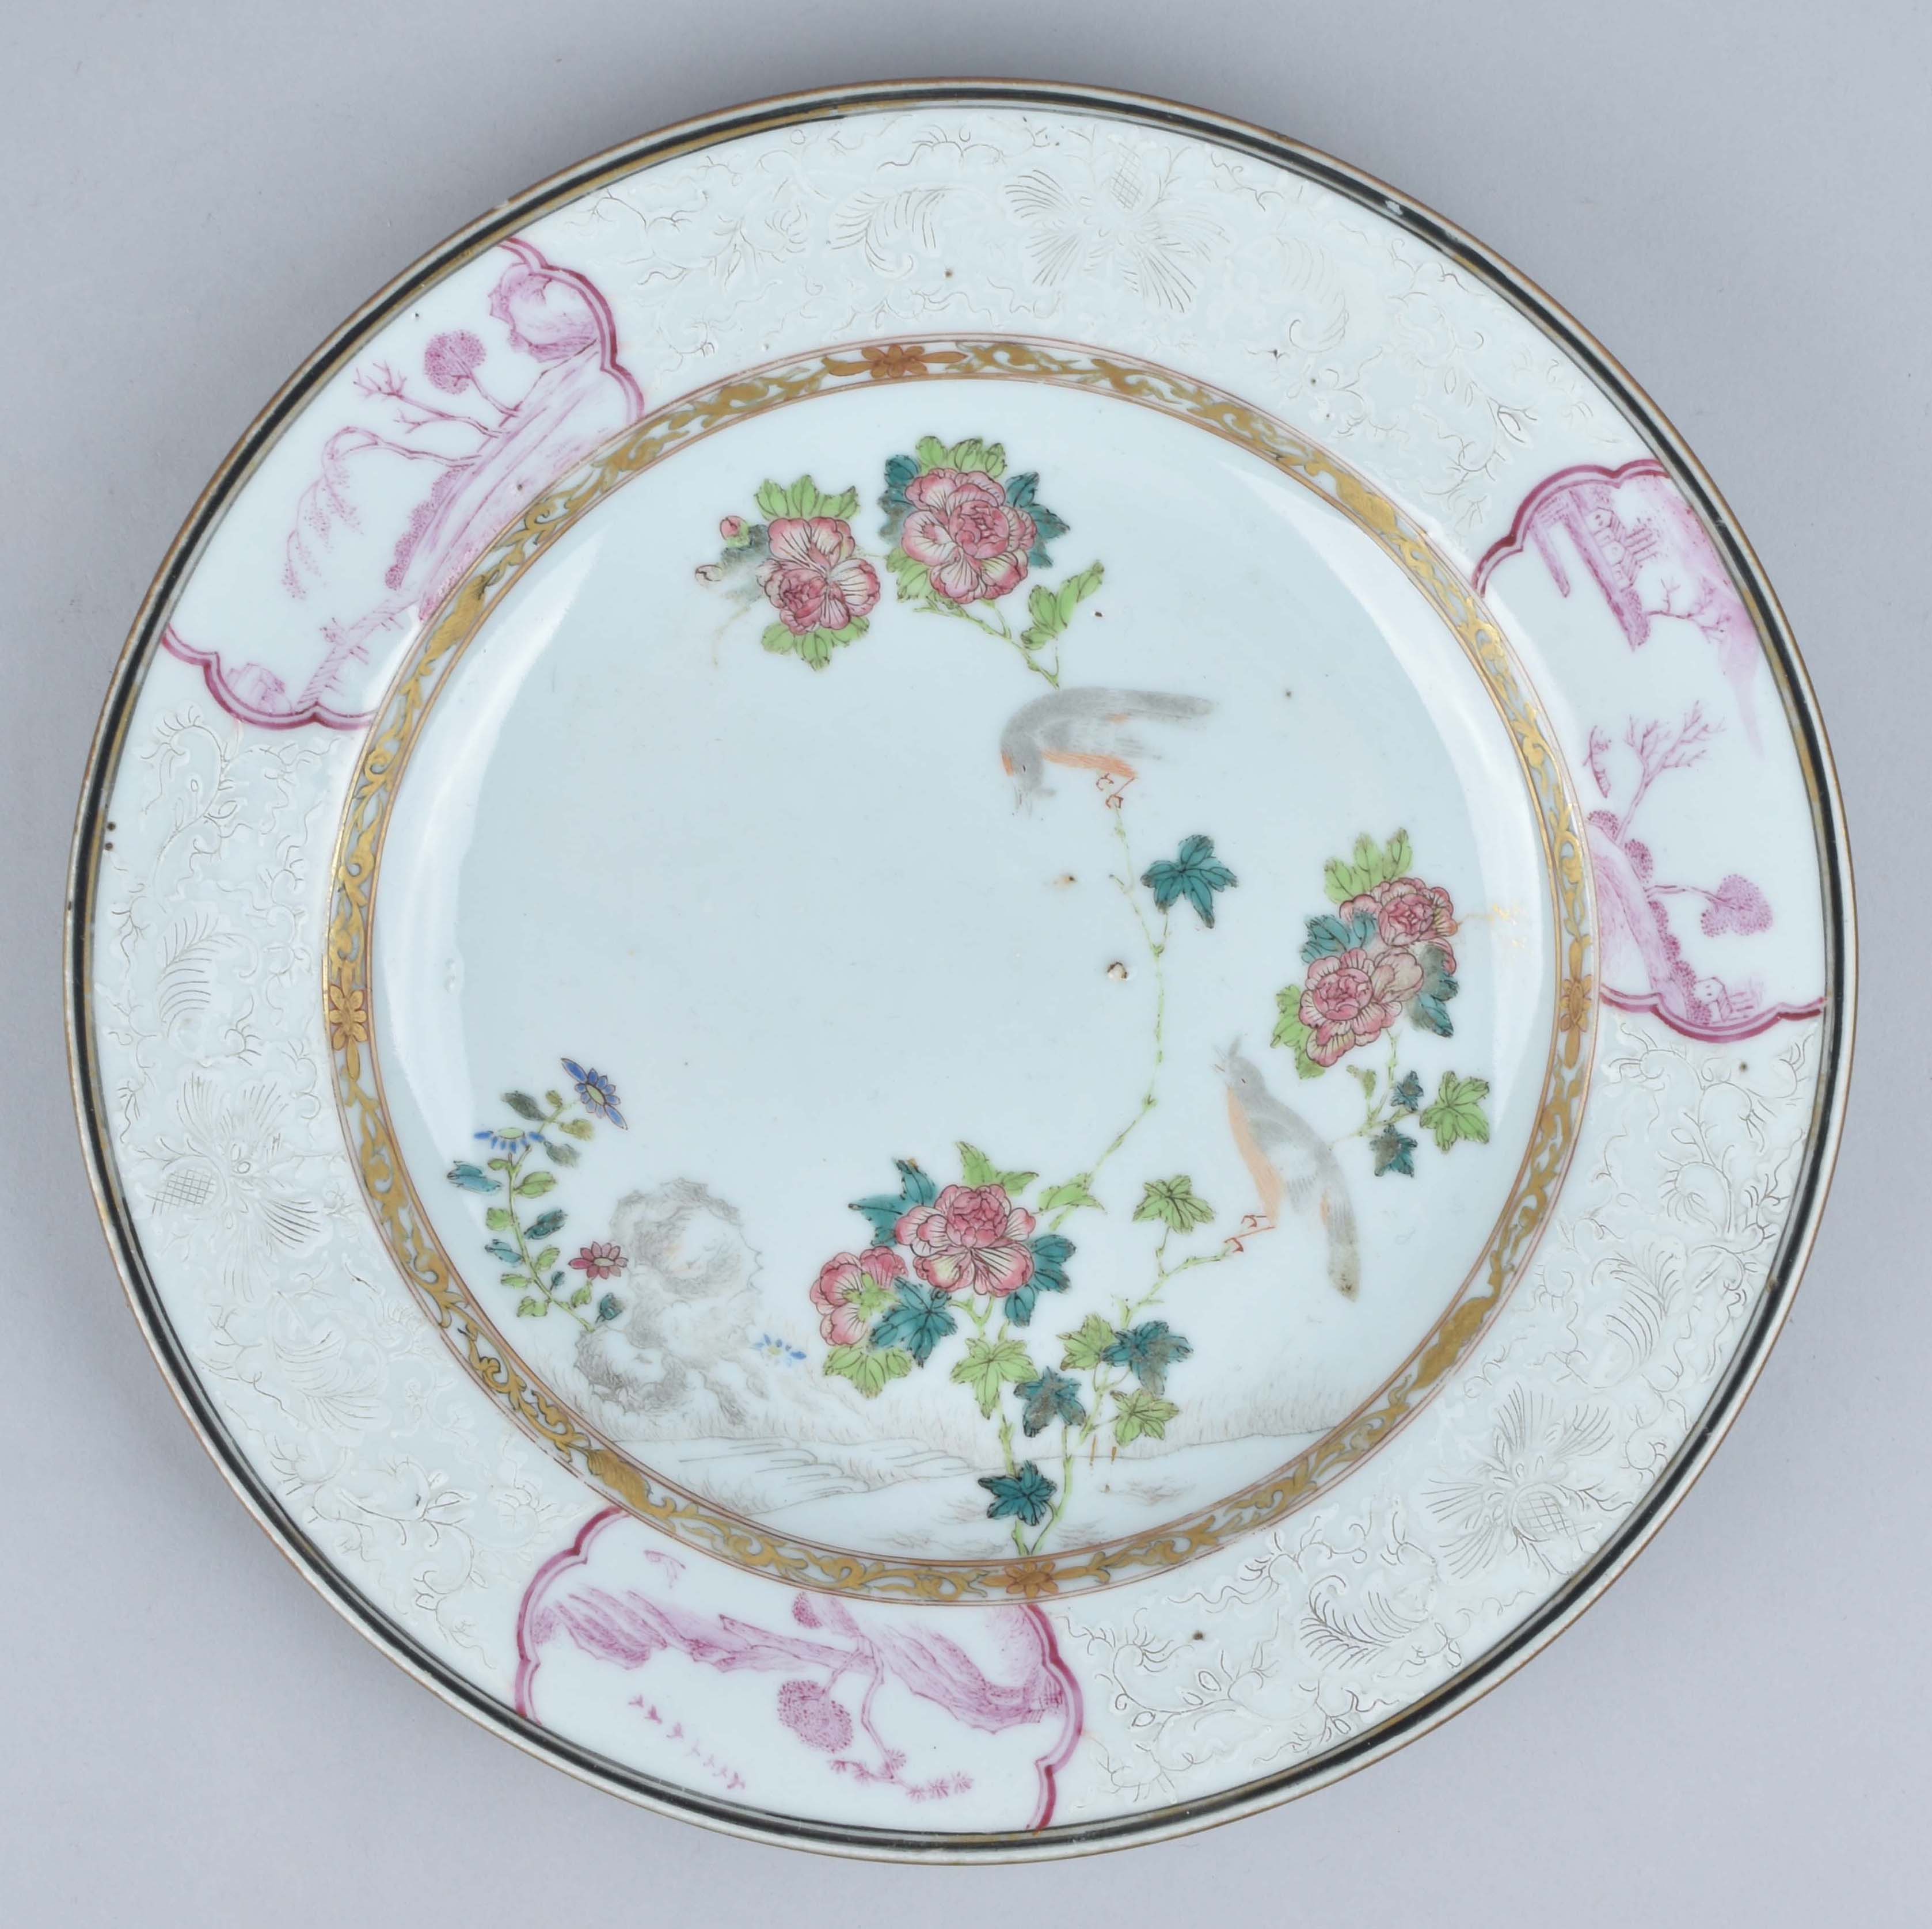 Famille rose Porcelaine Yongzheng (1723-1735), ca. 1730-1740, Chine